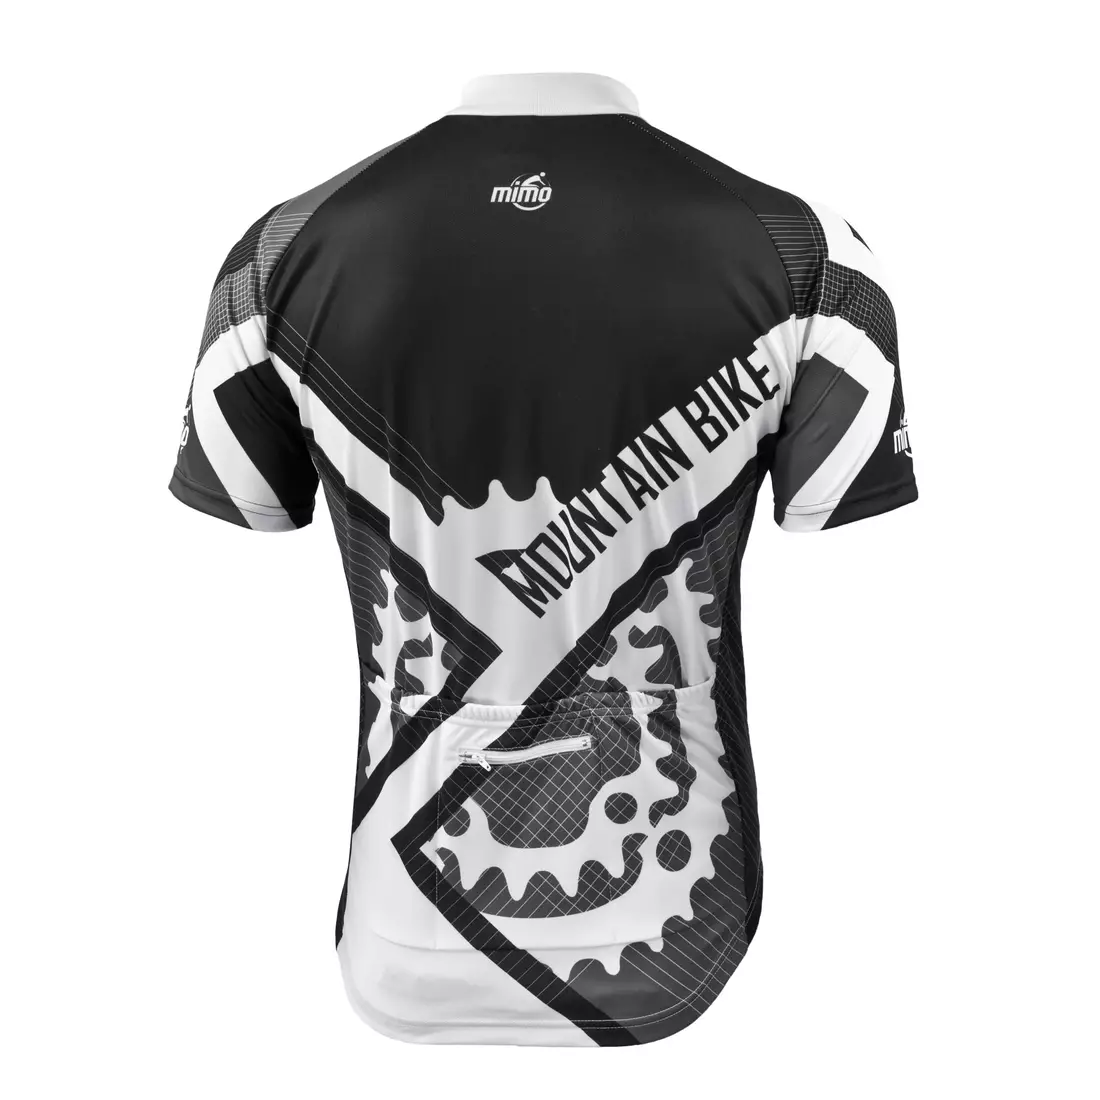 MikeSPORT DESIGN MB cycling jersey, black